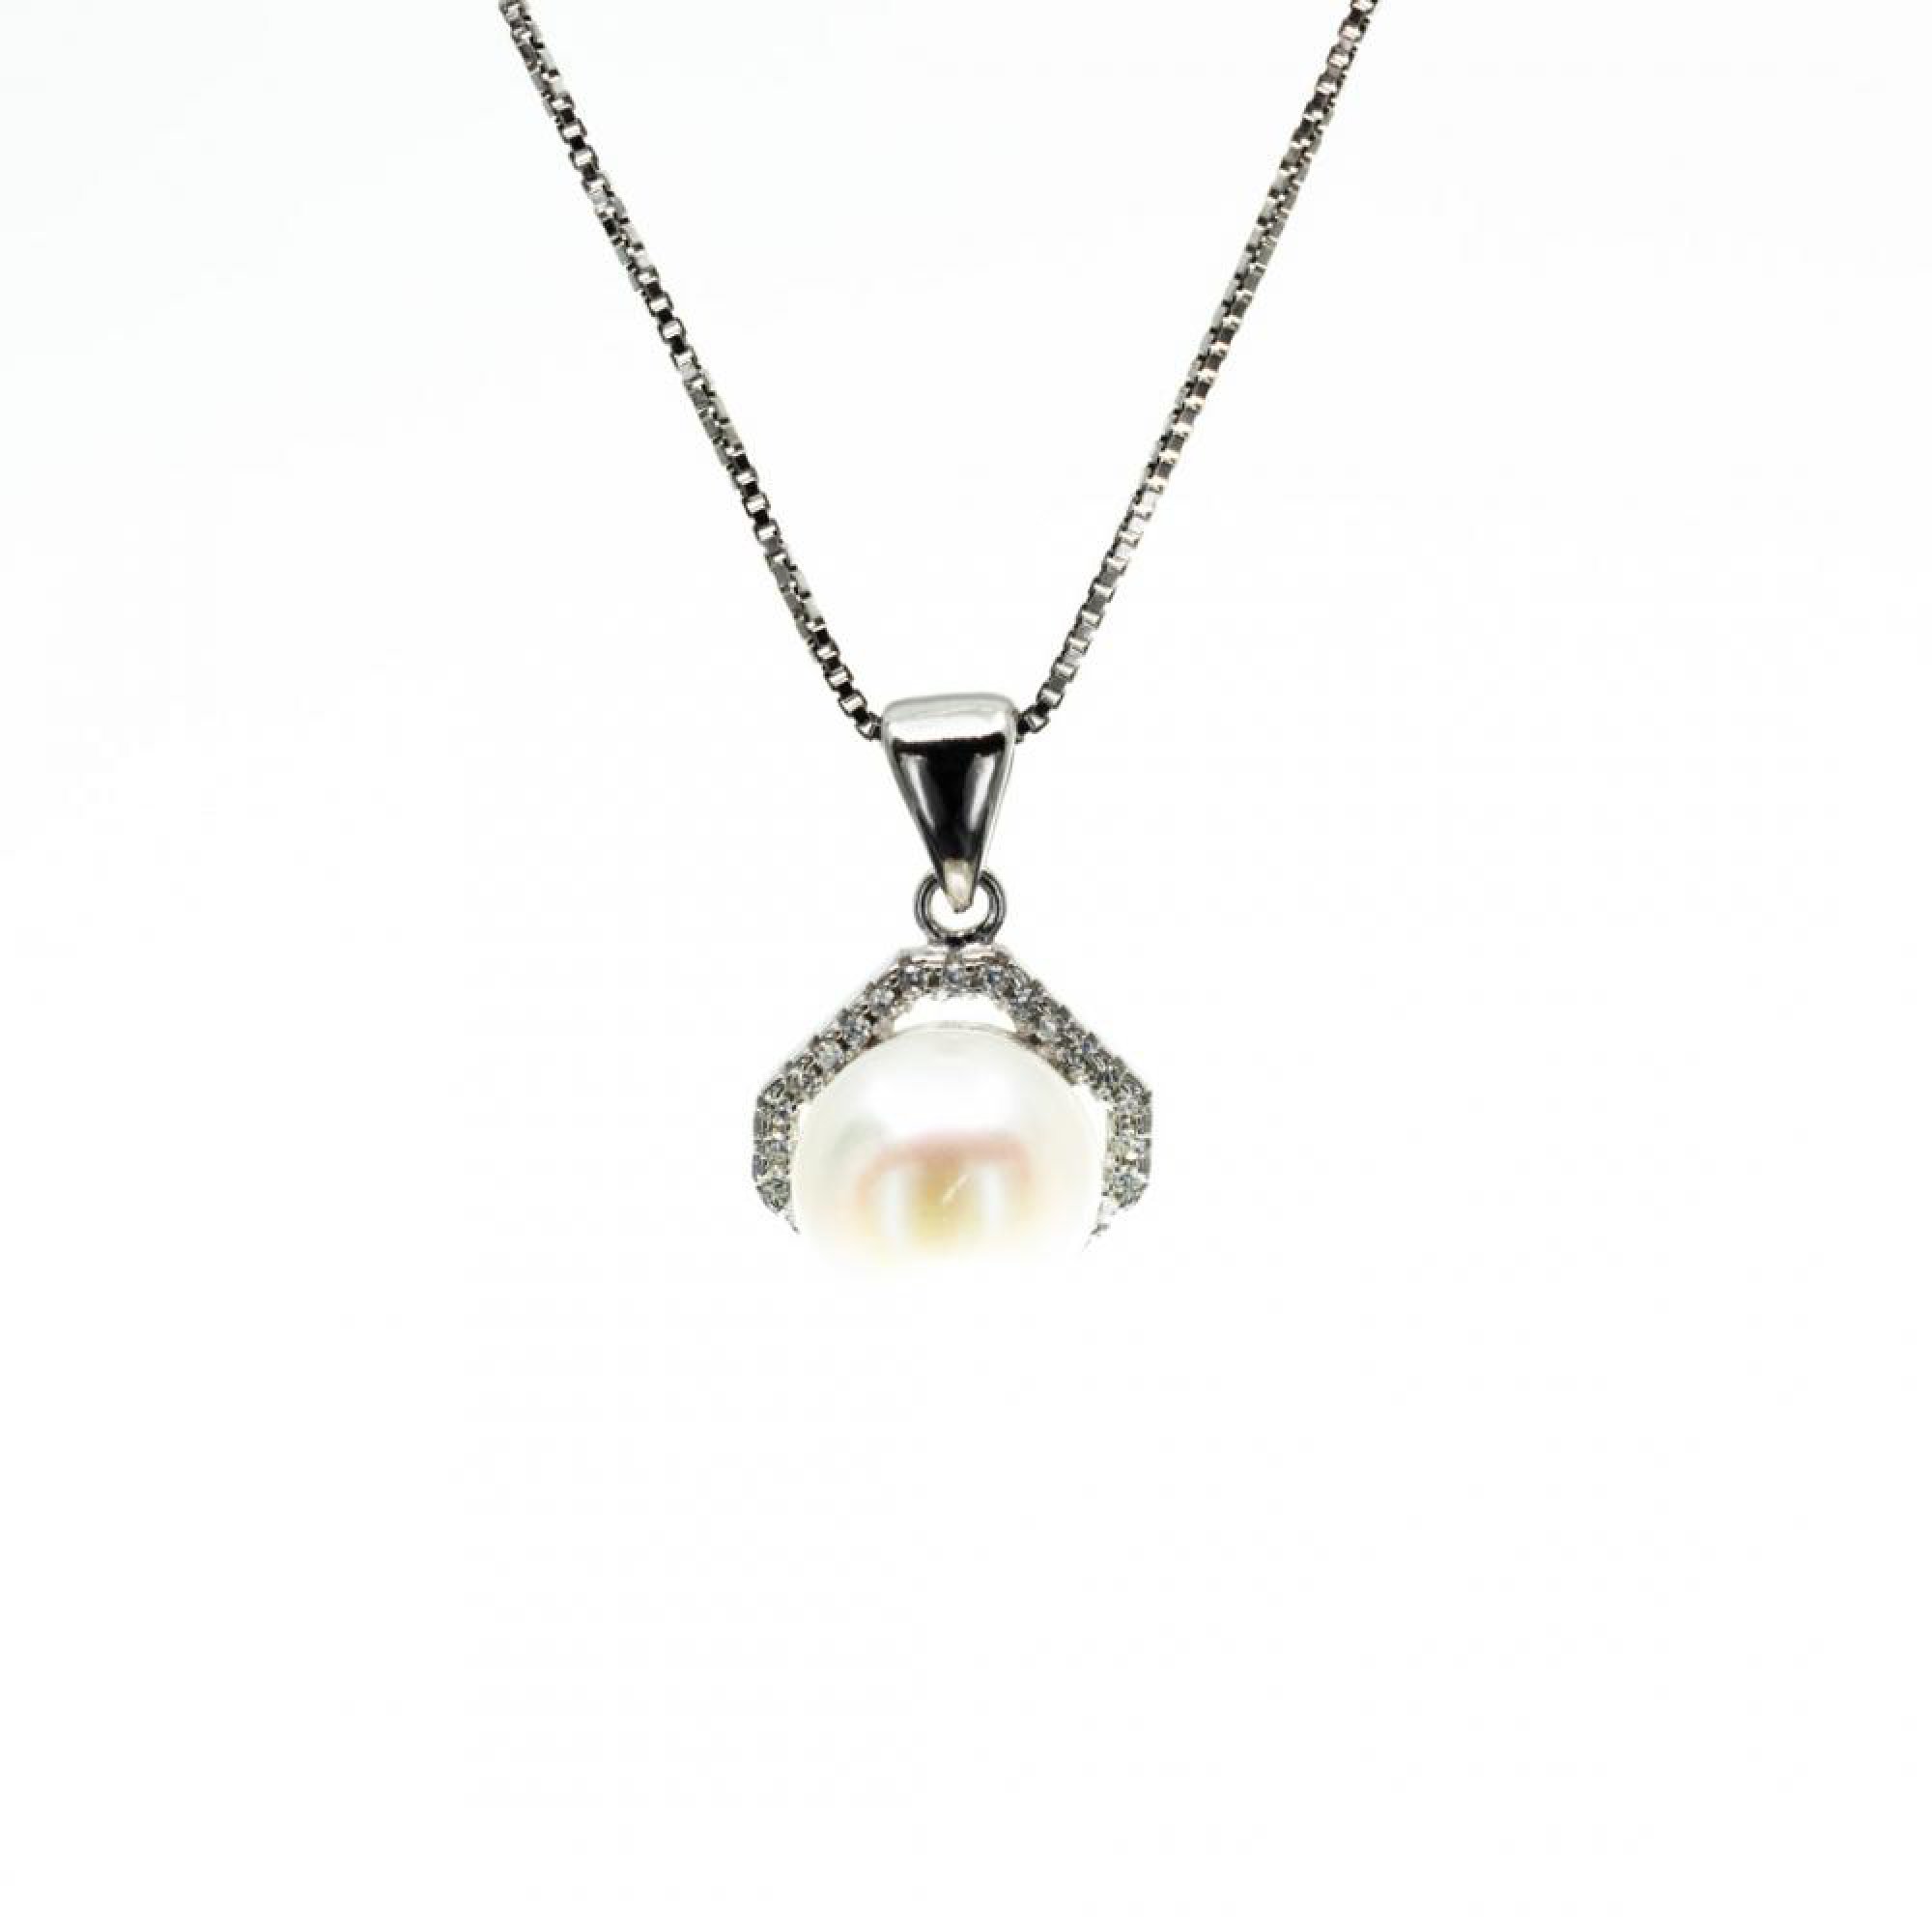 Necklace with real pearl and zircon stones